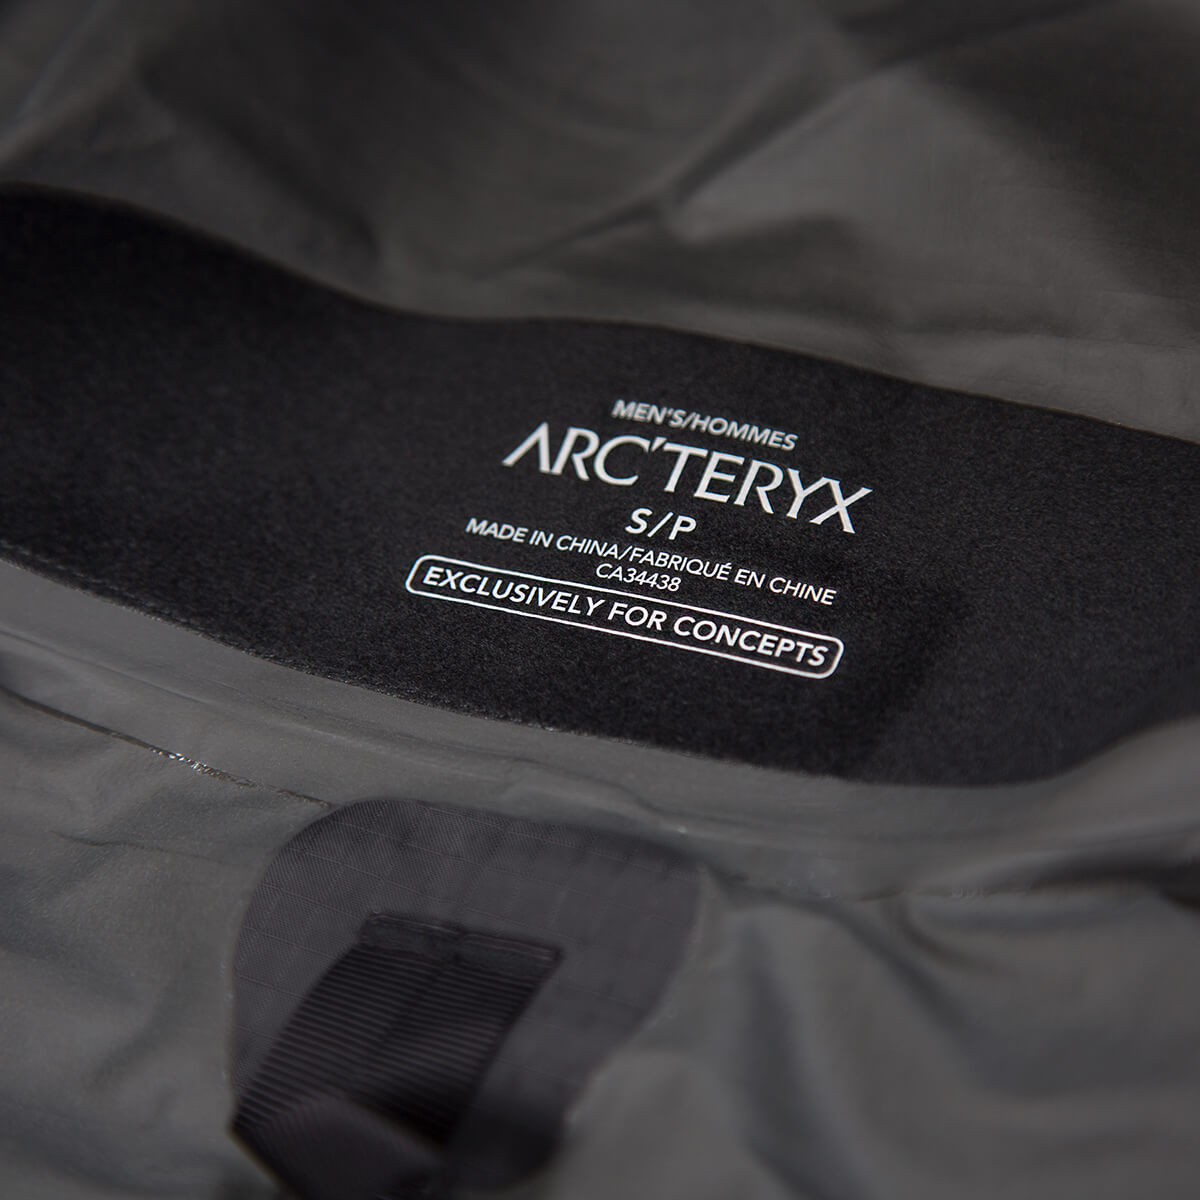 The Concepts x Arc'teryx Capsule Collection